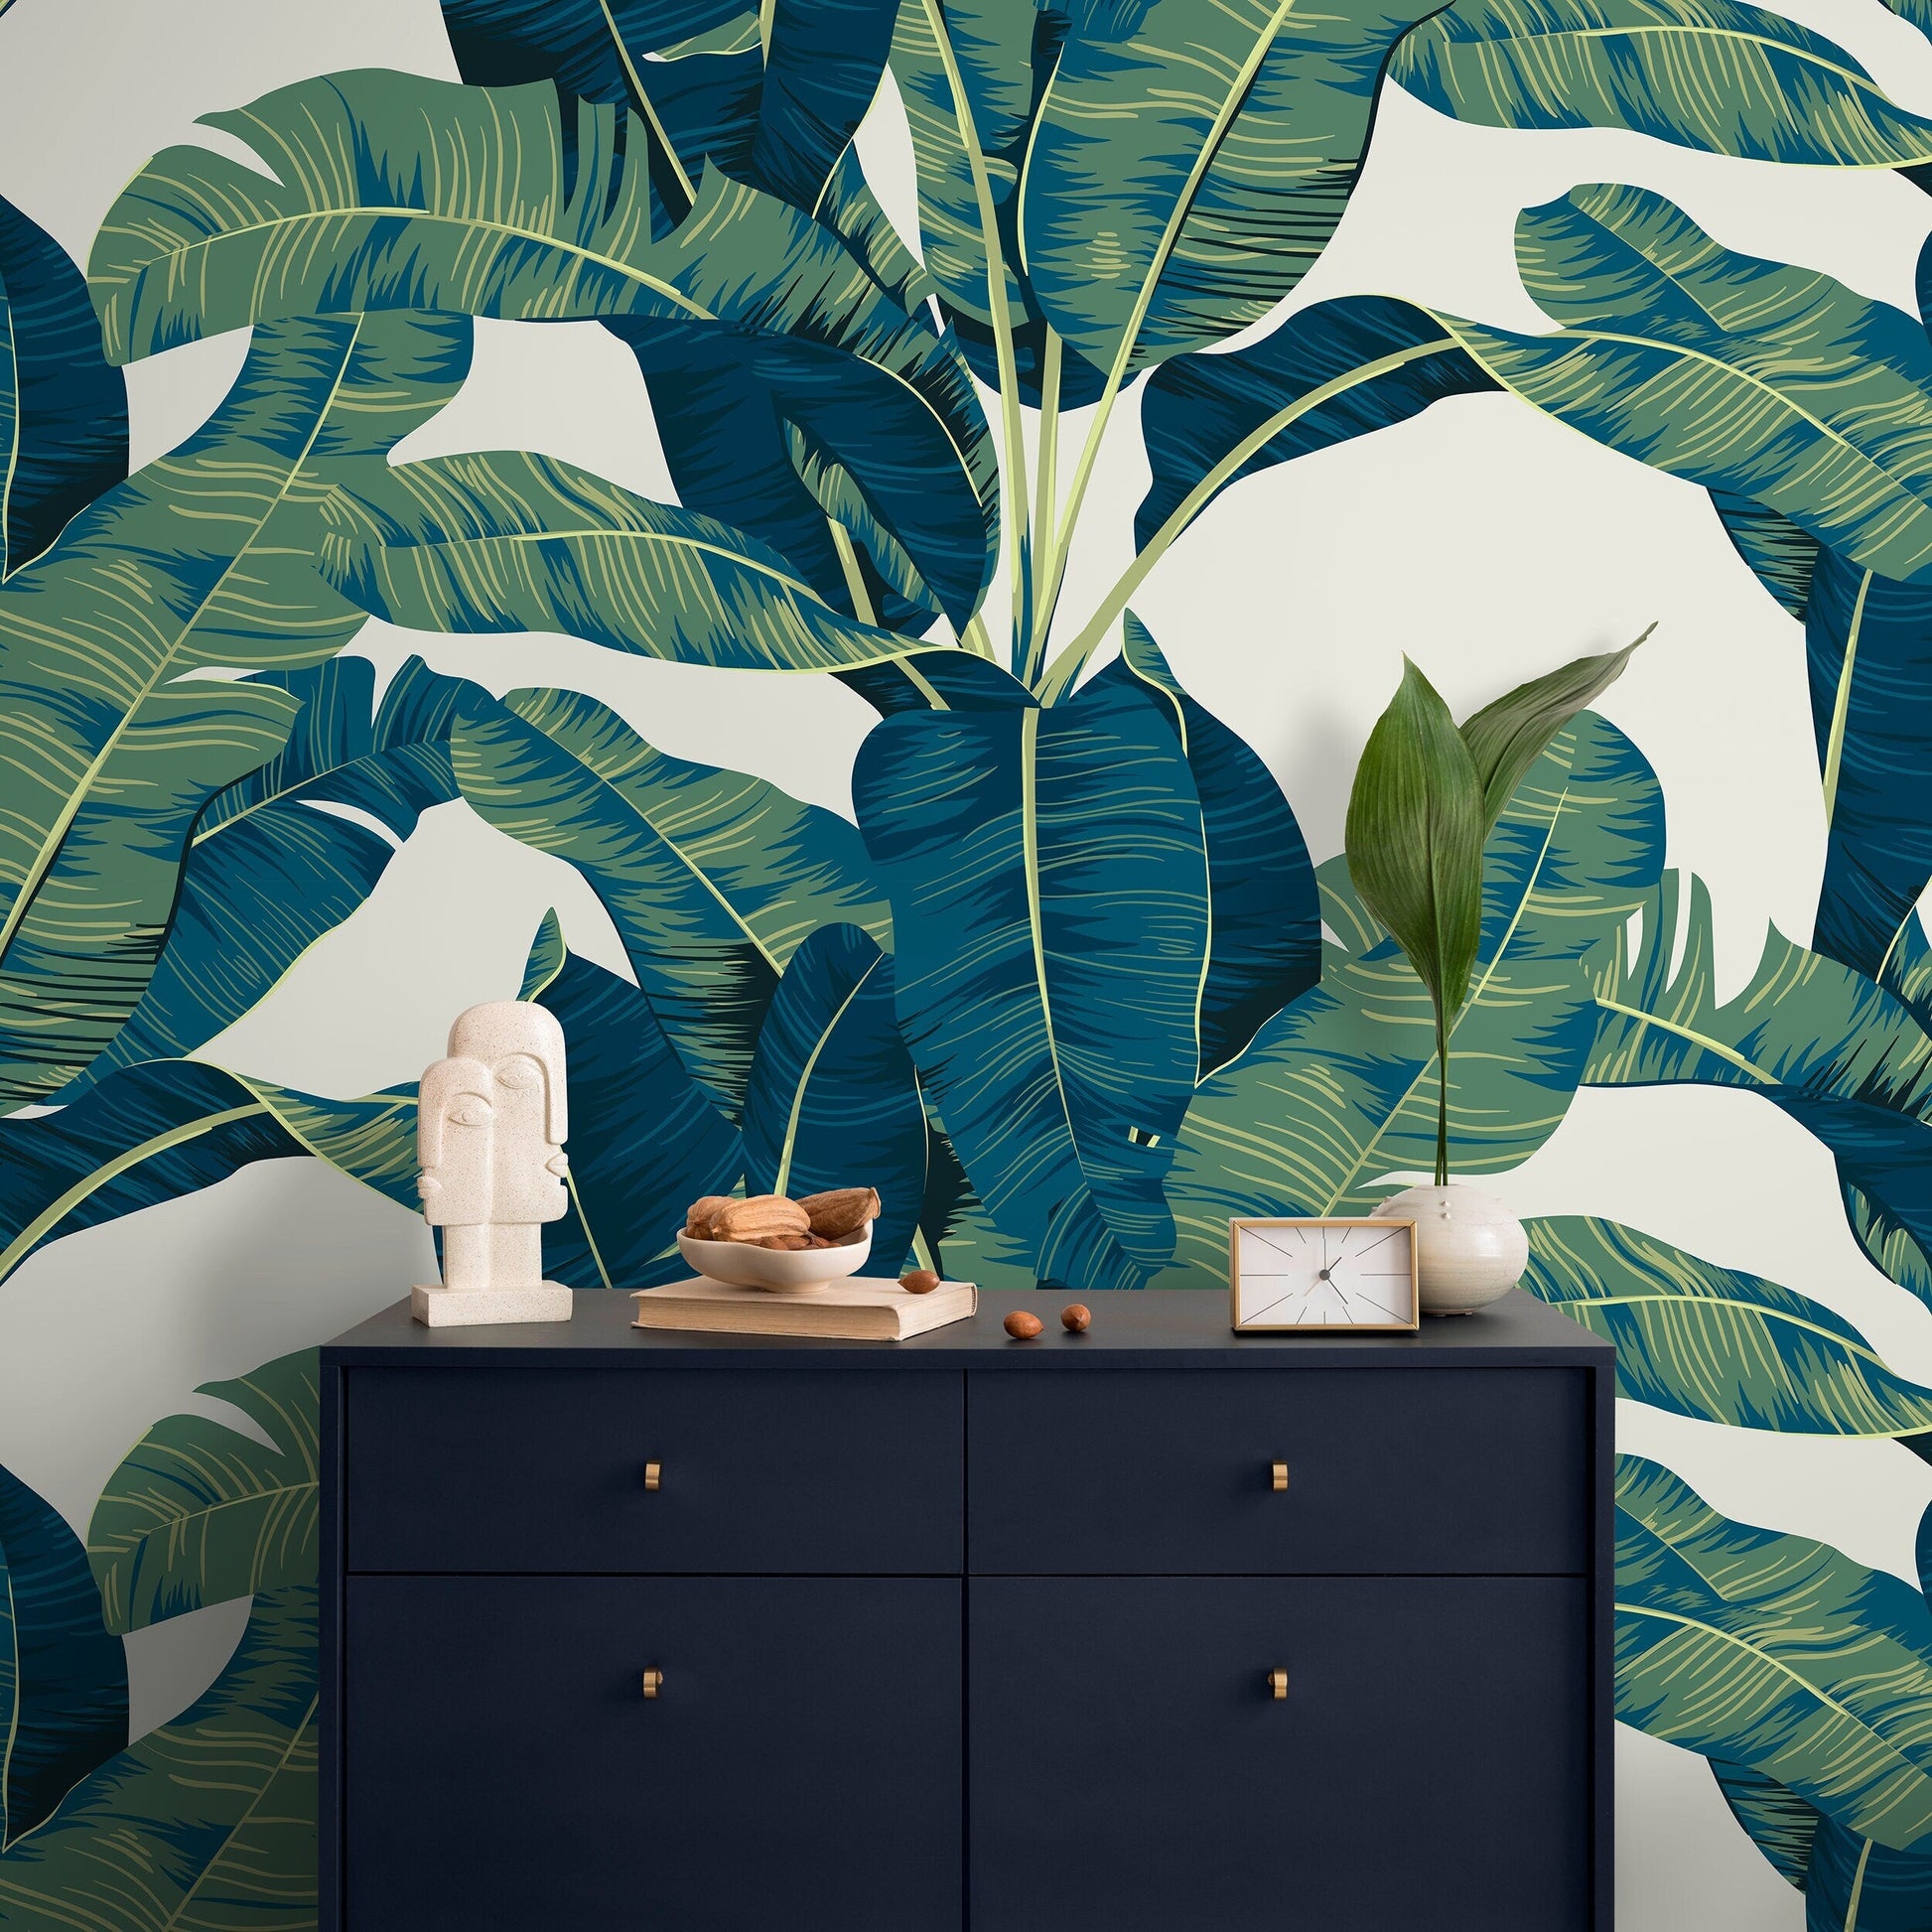 Tropical Banana Leaf Wallpaper Peel and Stick and Traditional Wallpaper - C160